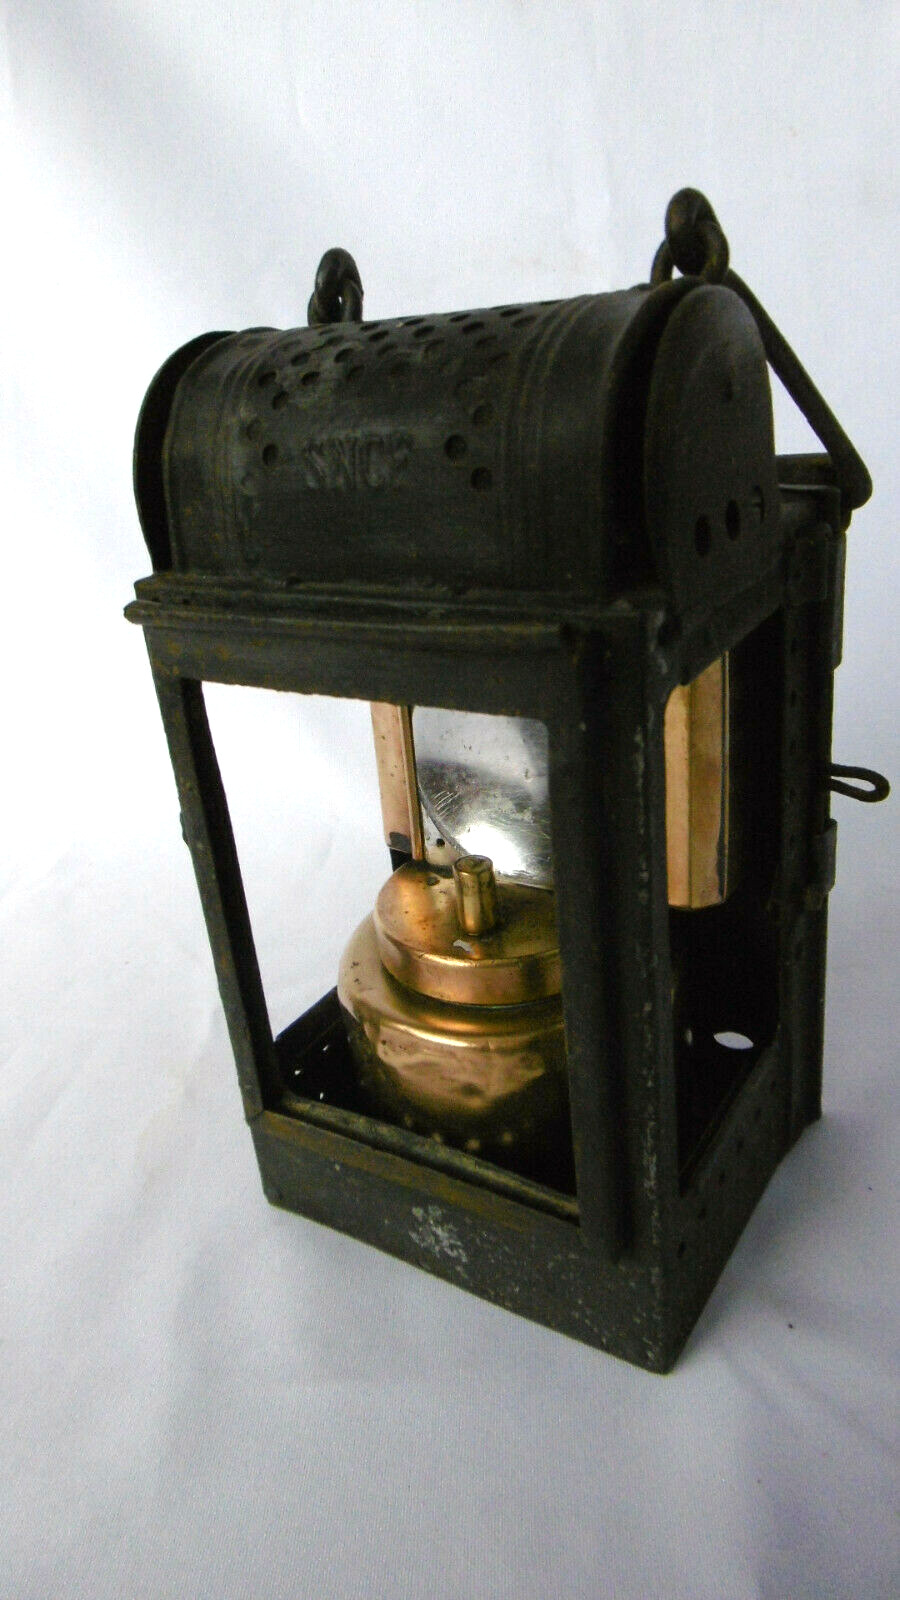 Antique Lantern With Carbide Chemin Iron André Ruffin? (Or Albert Swag)